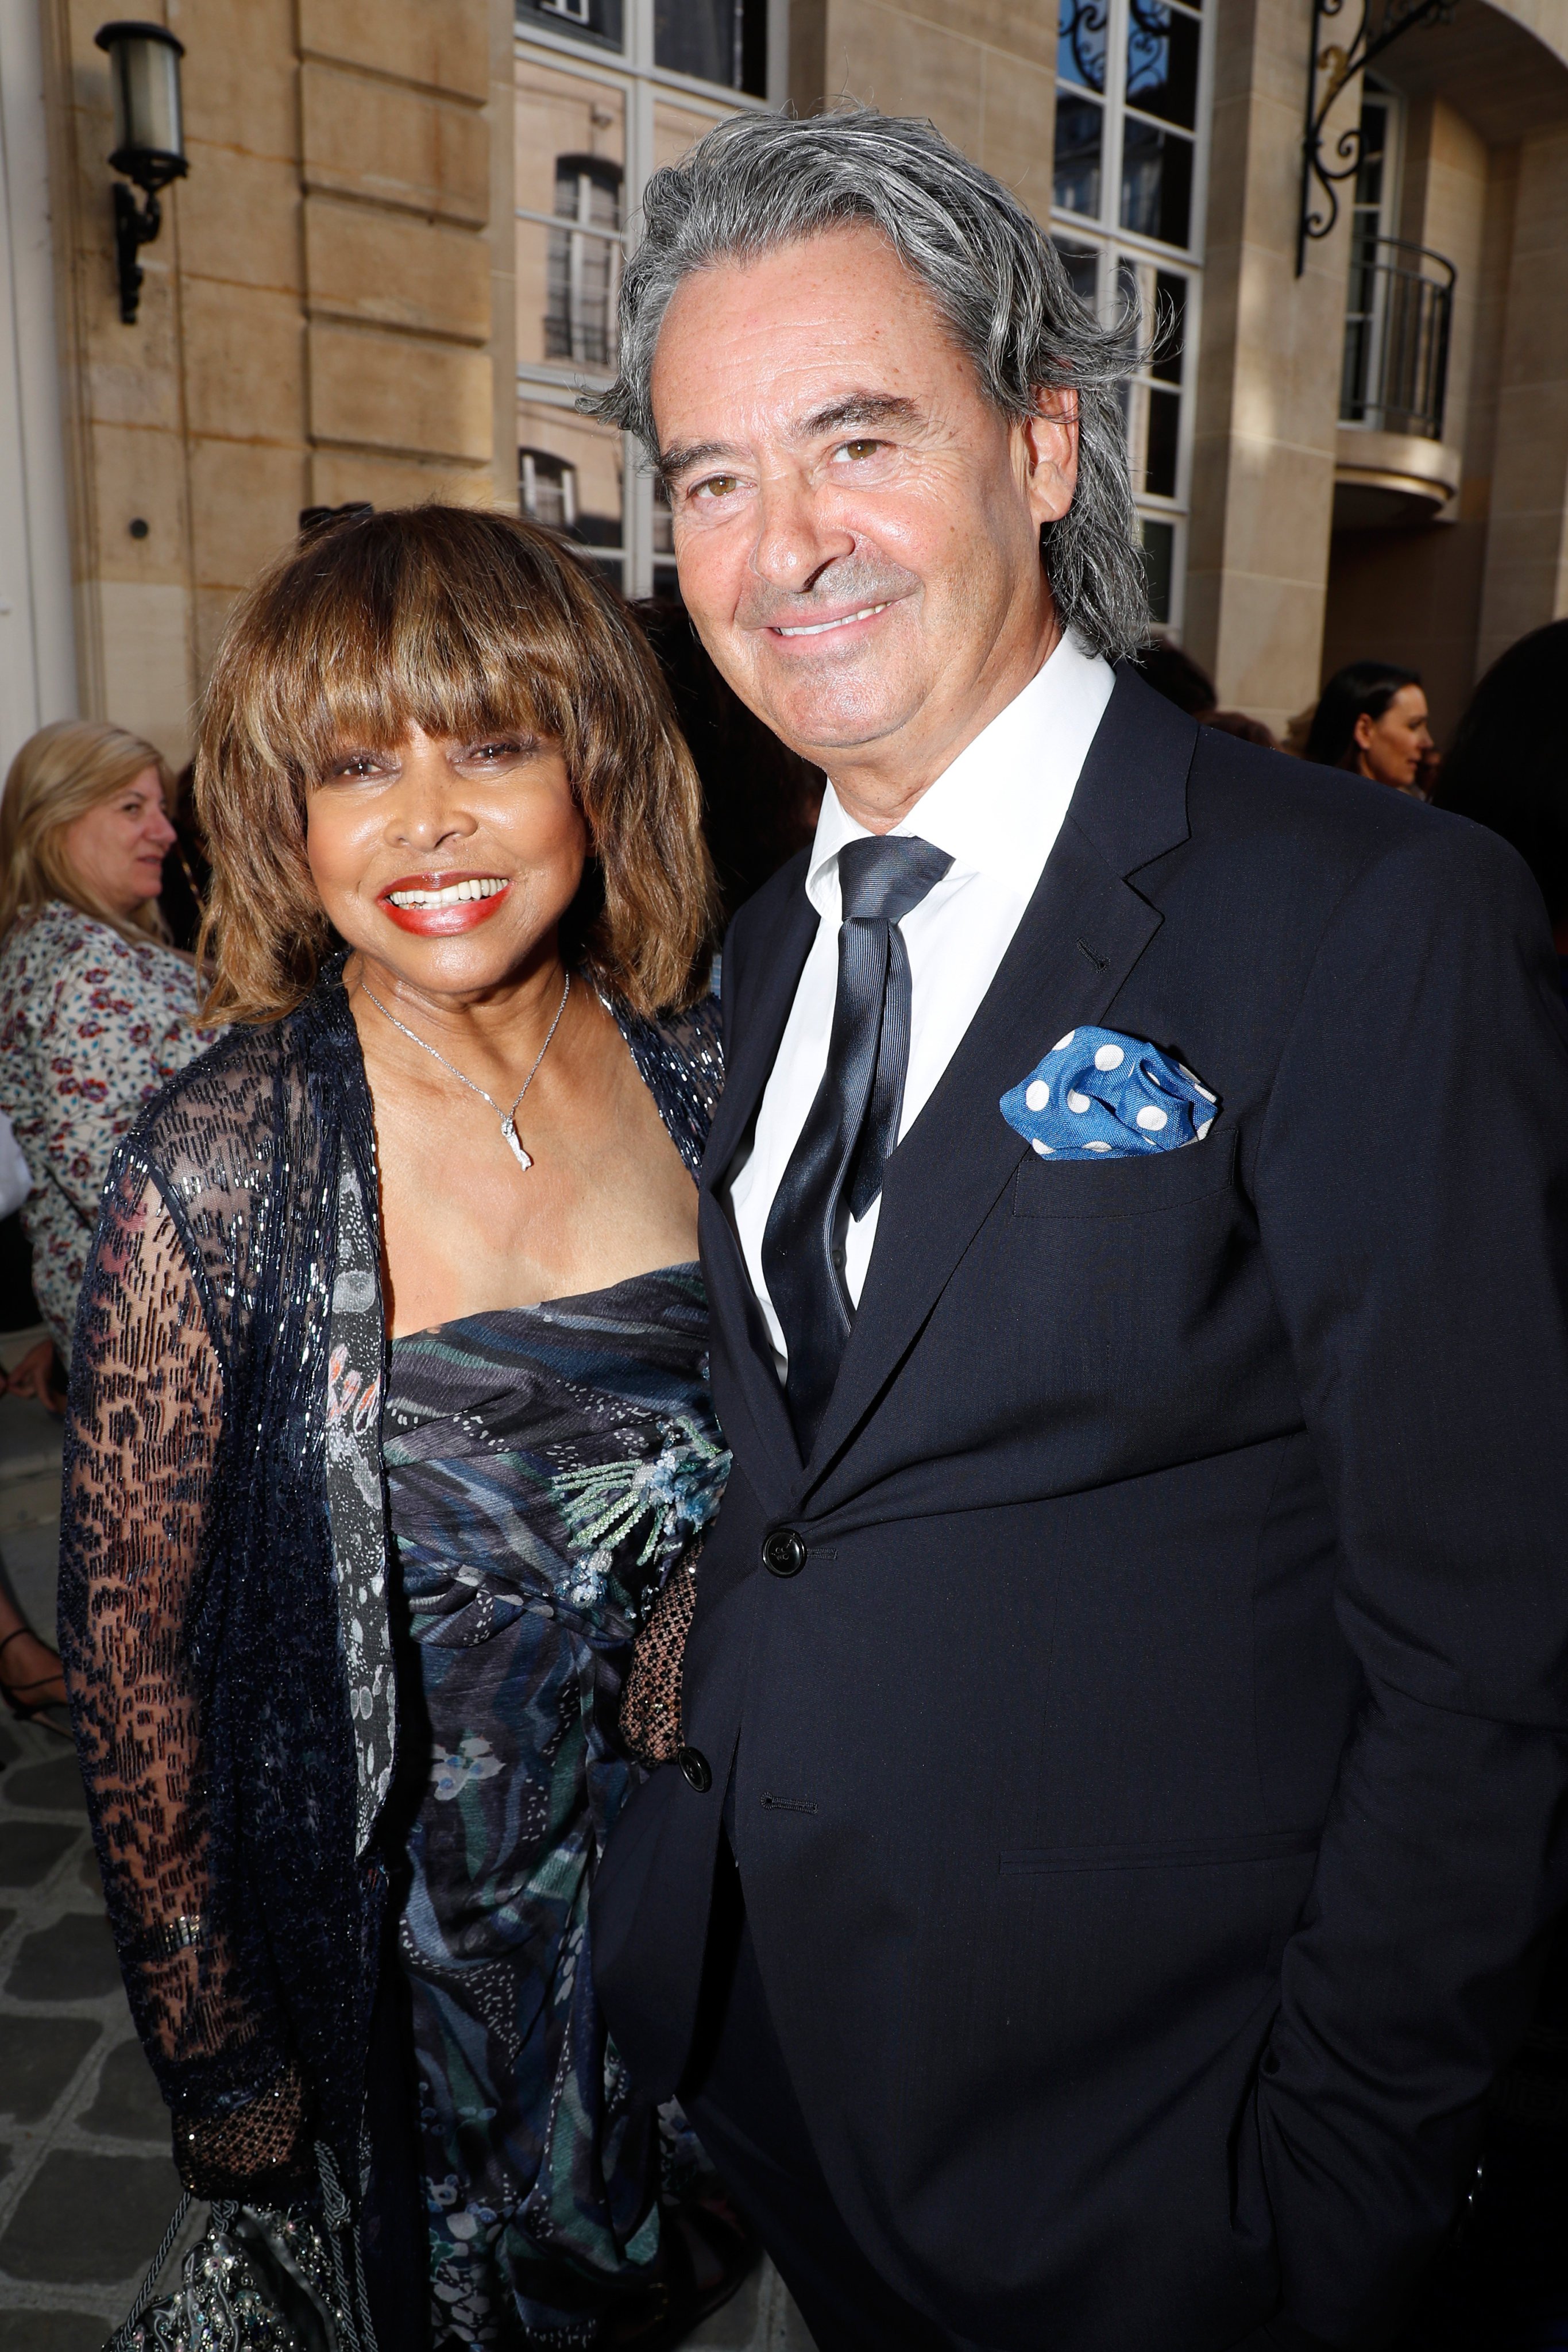 The love story between the late Tina Turner and Erwin Bach is unconventional but deeply moving. Photo: Getty Images